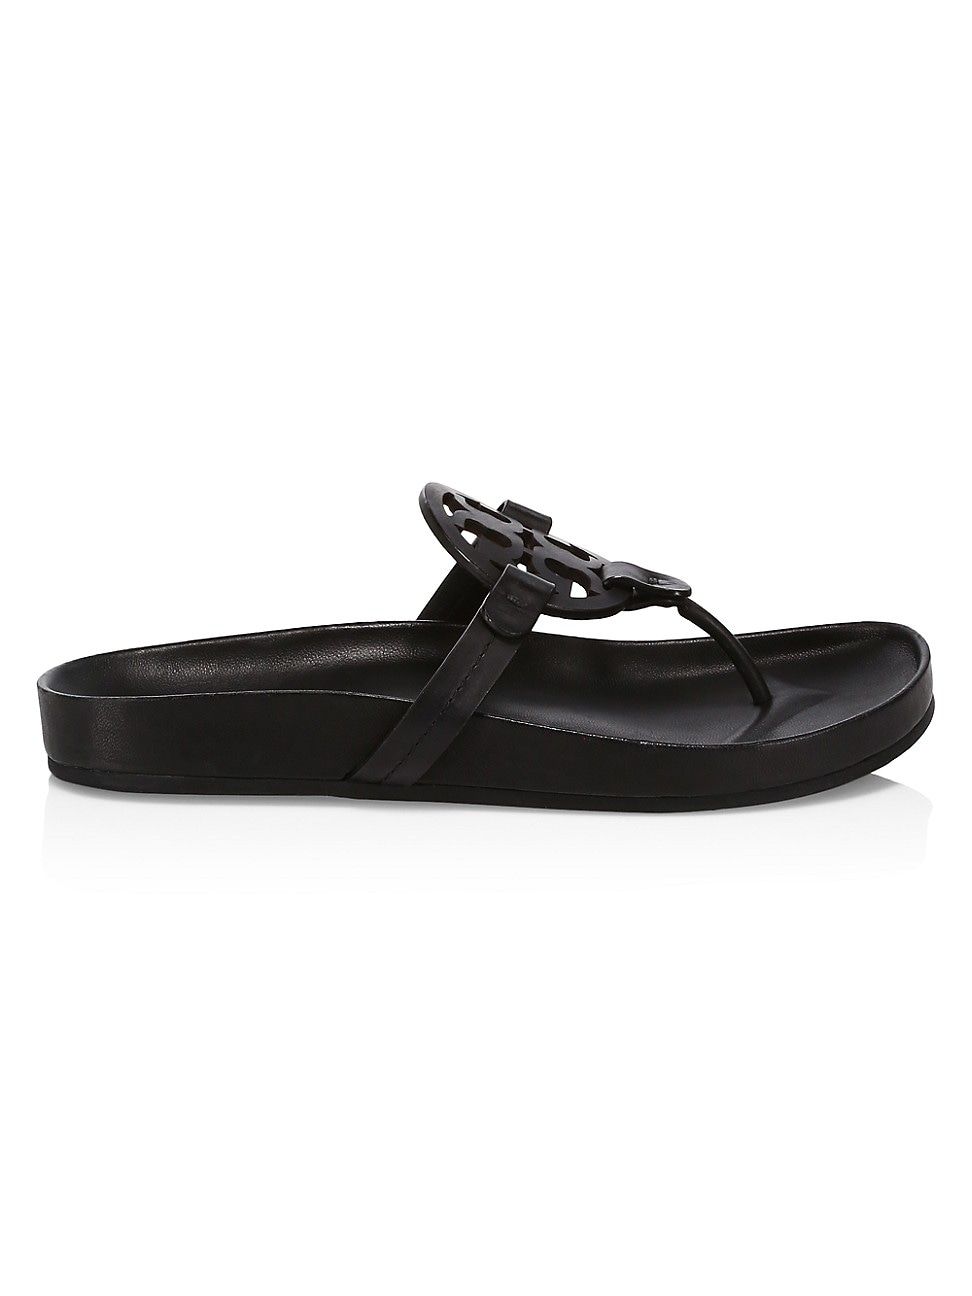 Tory Burch Women's Miller Cloud Leather Thong Slides - Perfect Black - Size 8.5 Sandals | Saks Fifth Avenue